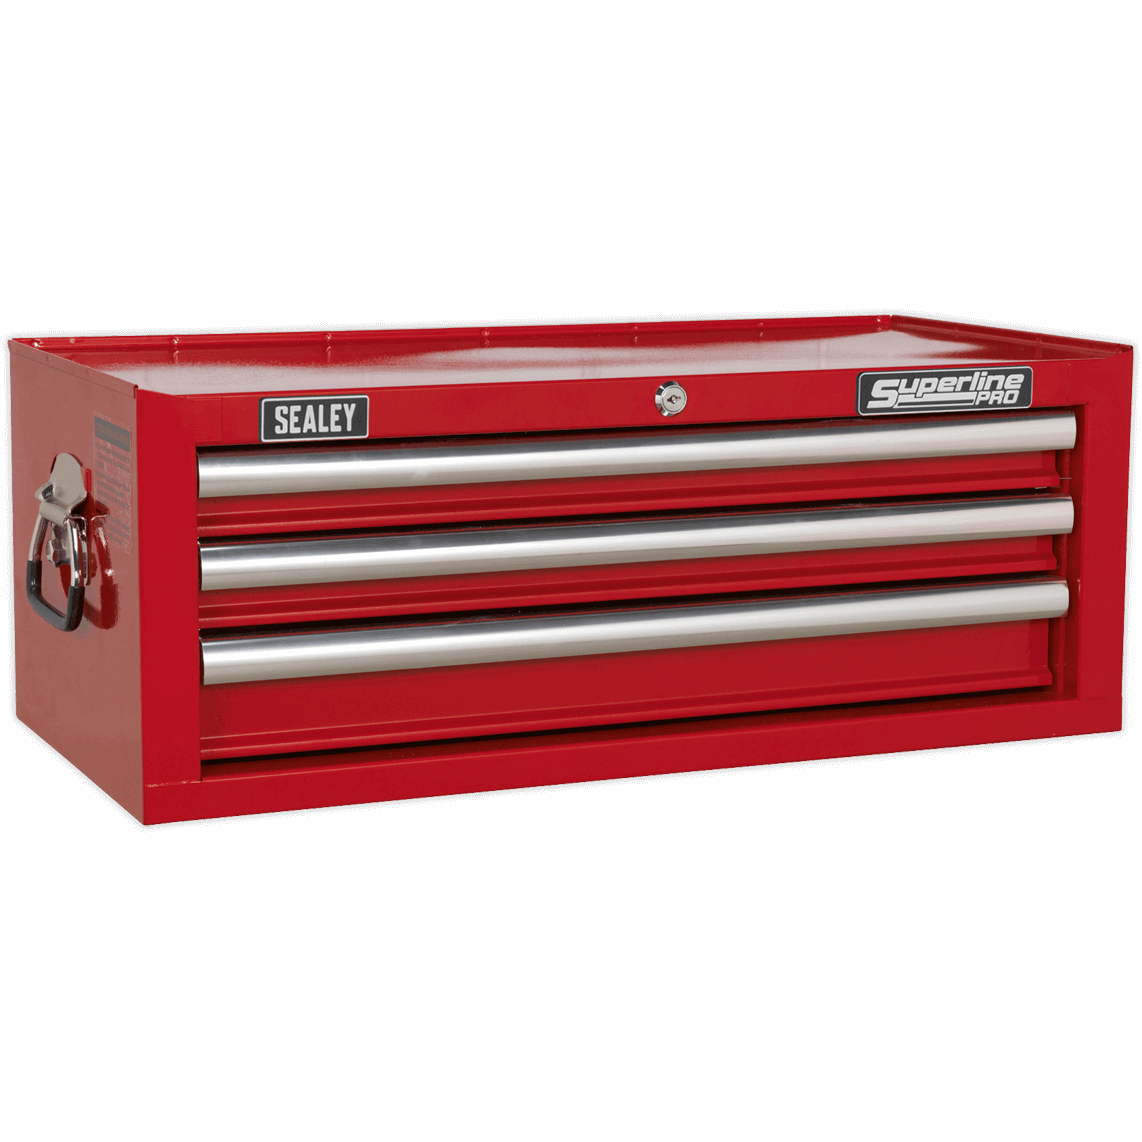 Sealey Superline Pro 3 Drawer Heavy Duty Mid Tool Chest Red